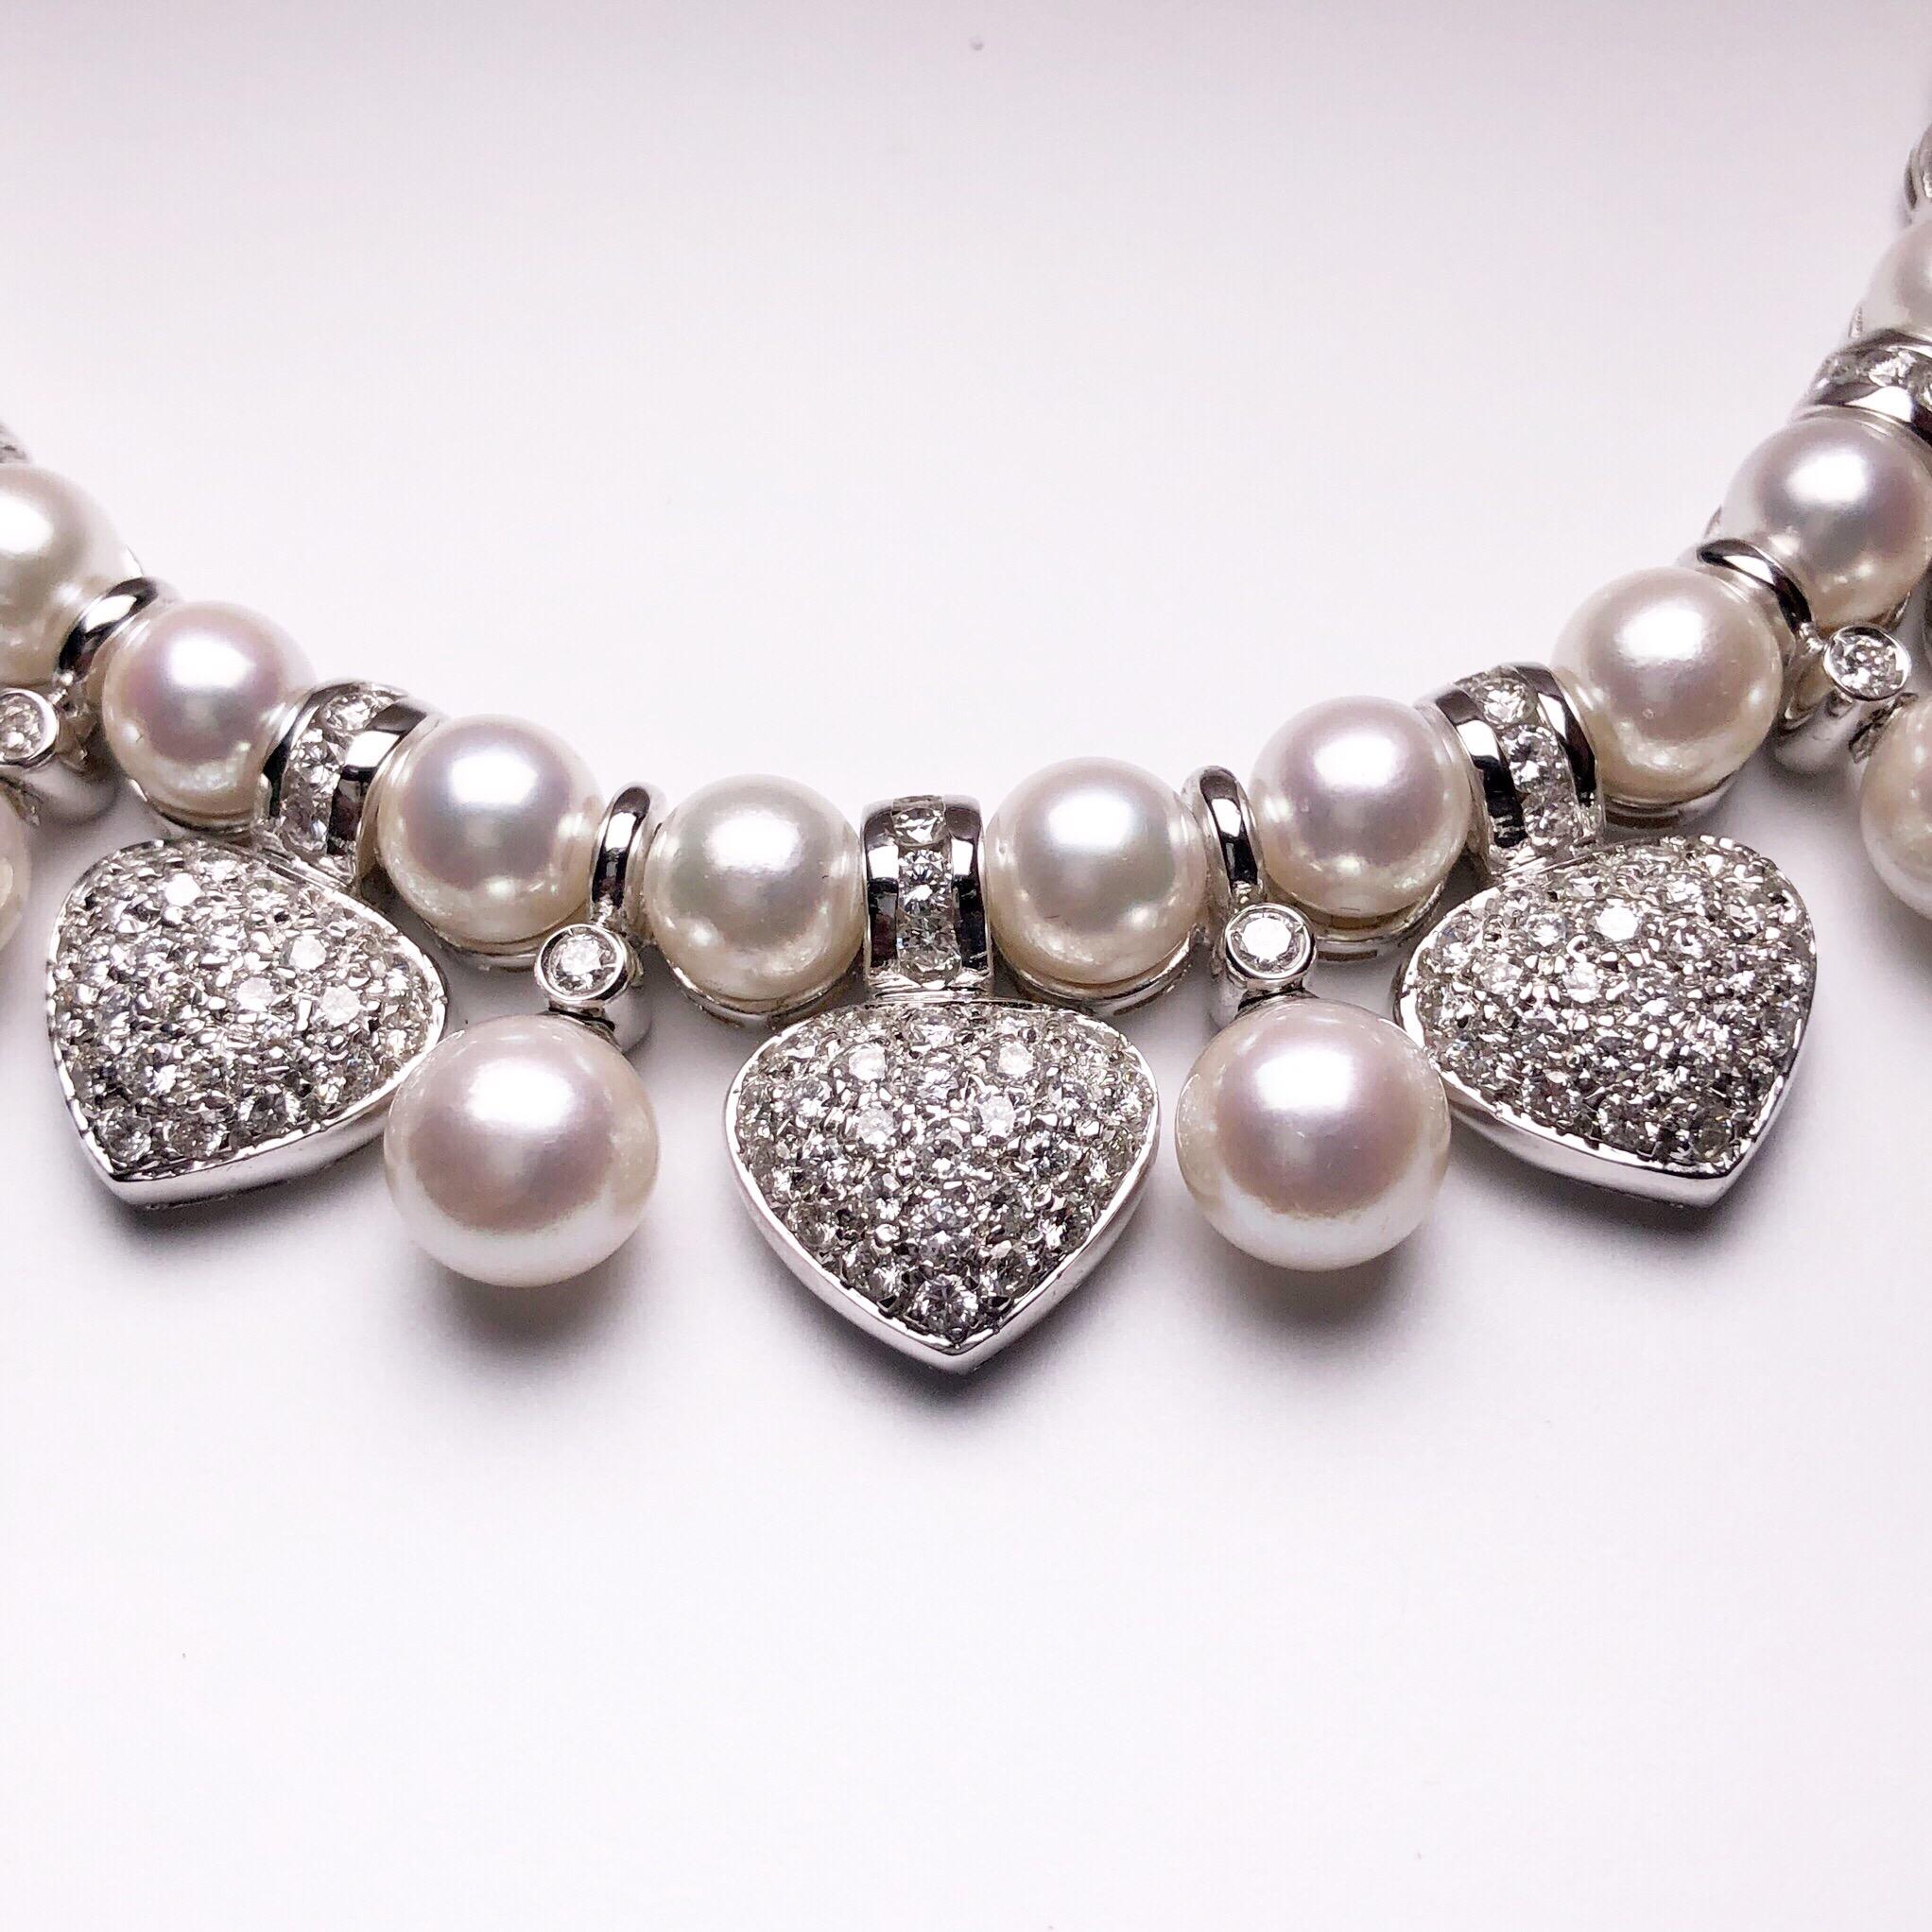 Contemporary Tannler of Switzerland 18KT Gold, 8.50 Carat Diamond Hearts and Pearl Necklace For Sale